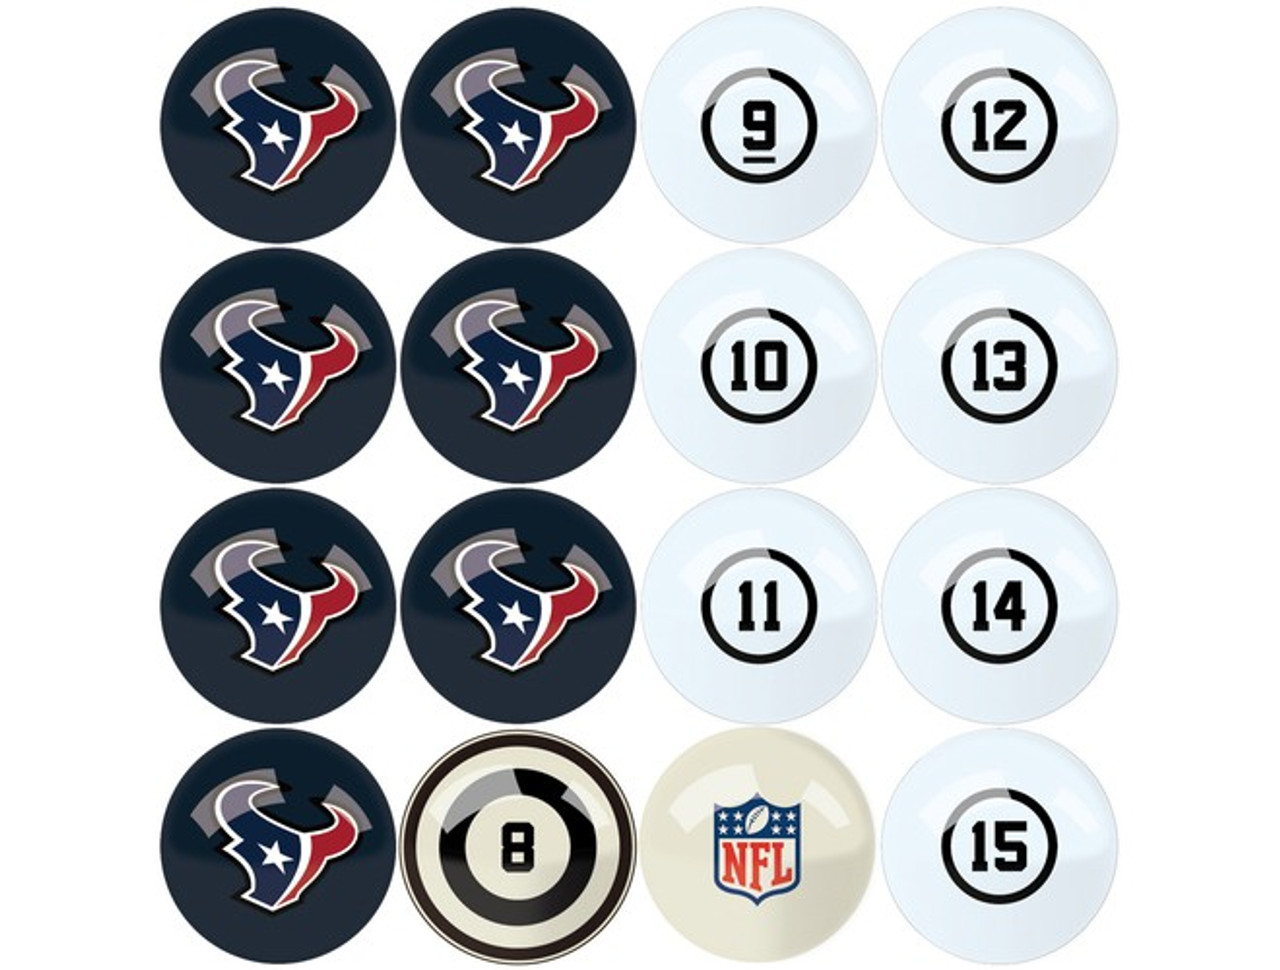 626-1034, Houston, Texans, NFL,  Billiard, Pool,  Balls, Numbered, with Numbers, FREE SHIPPING